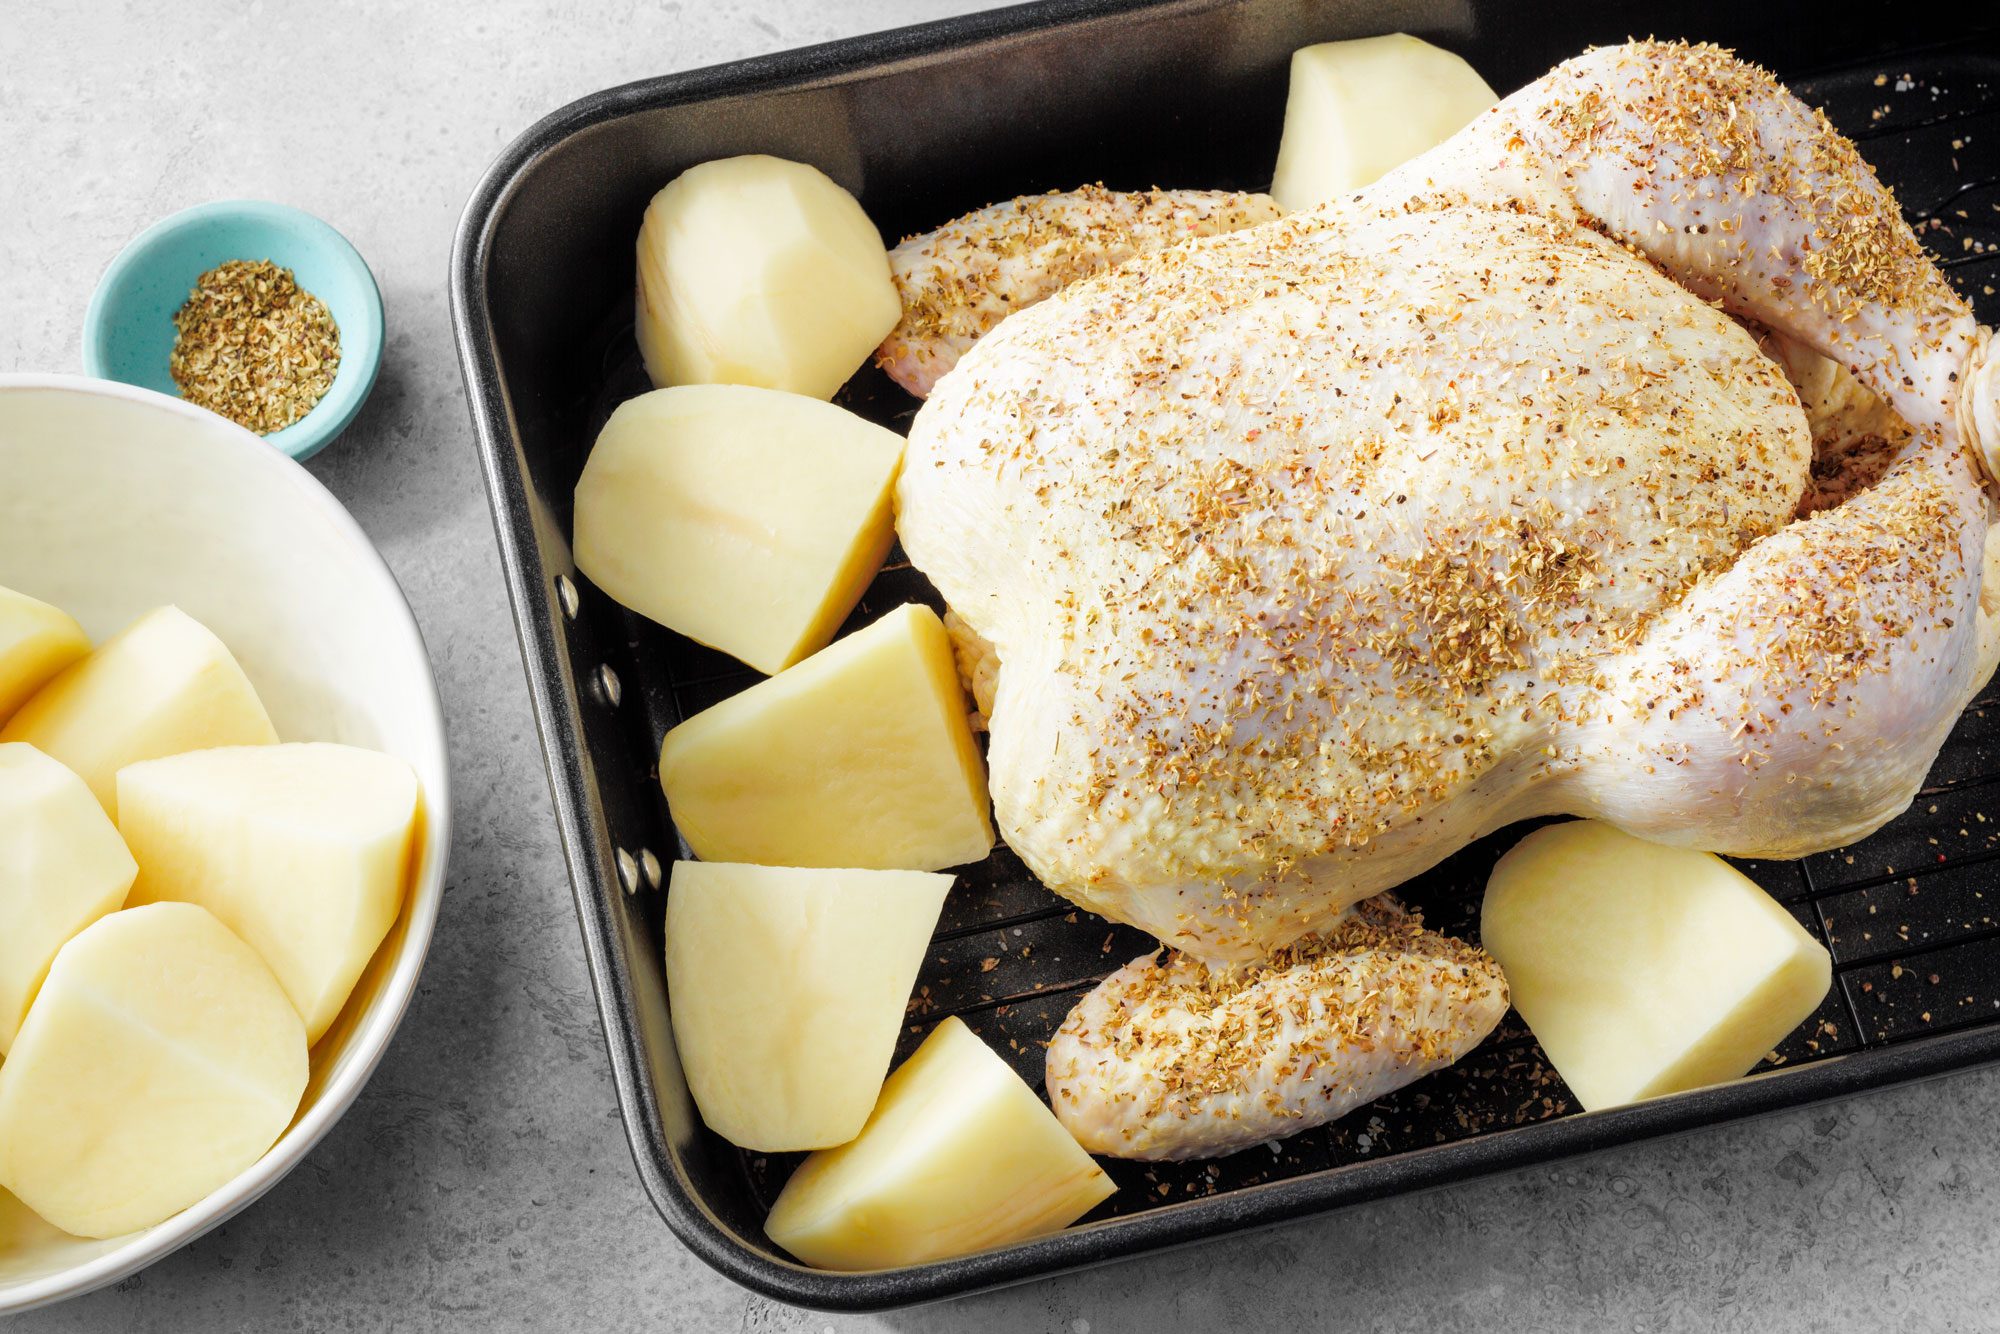 Seasoned Chicken And Potatoes placed in a roasting pan on marble surface